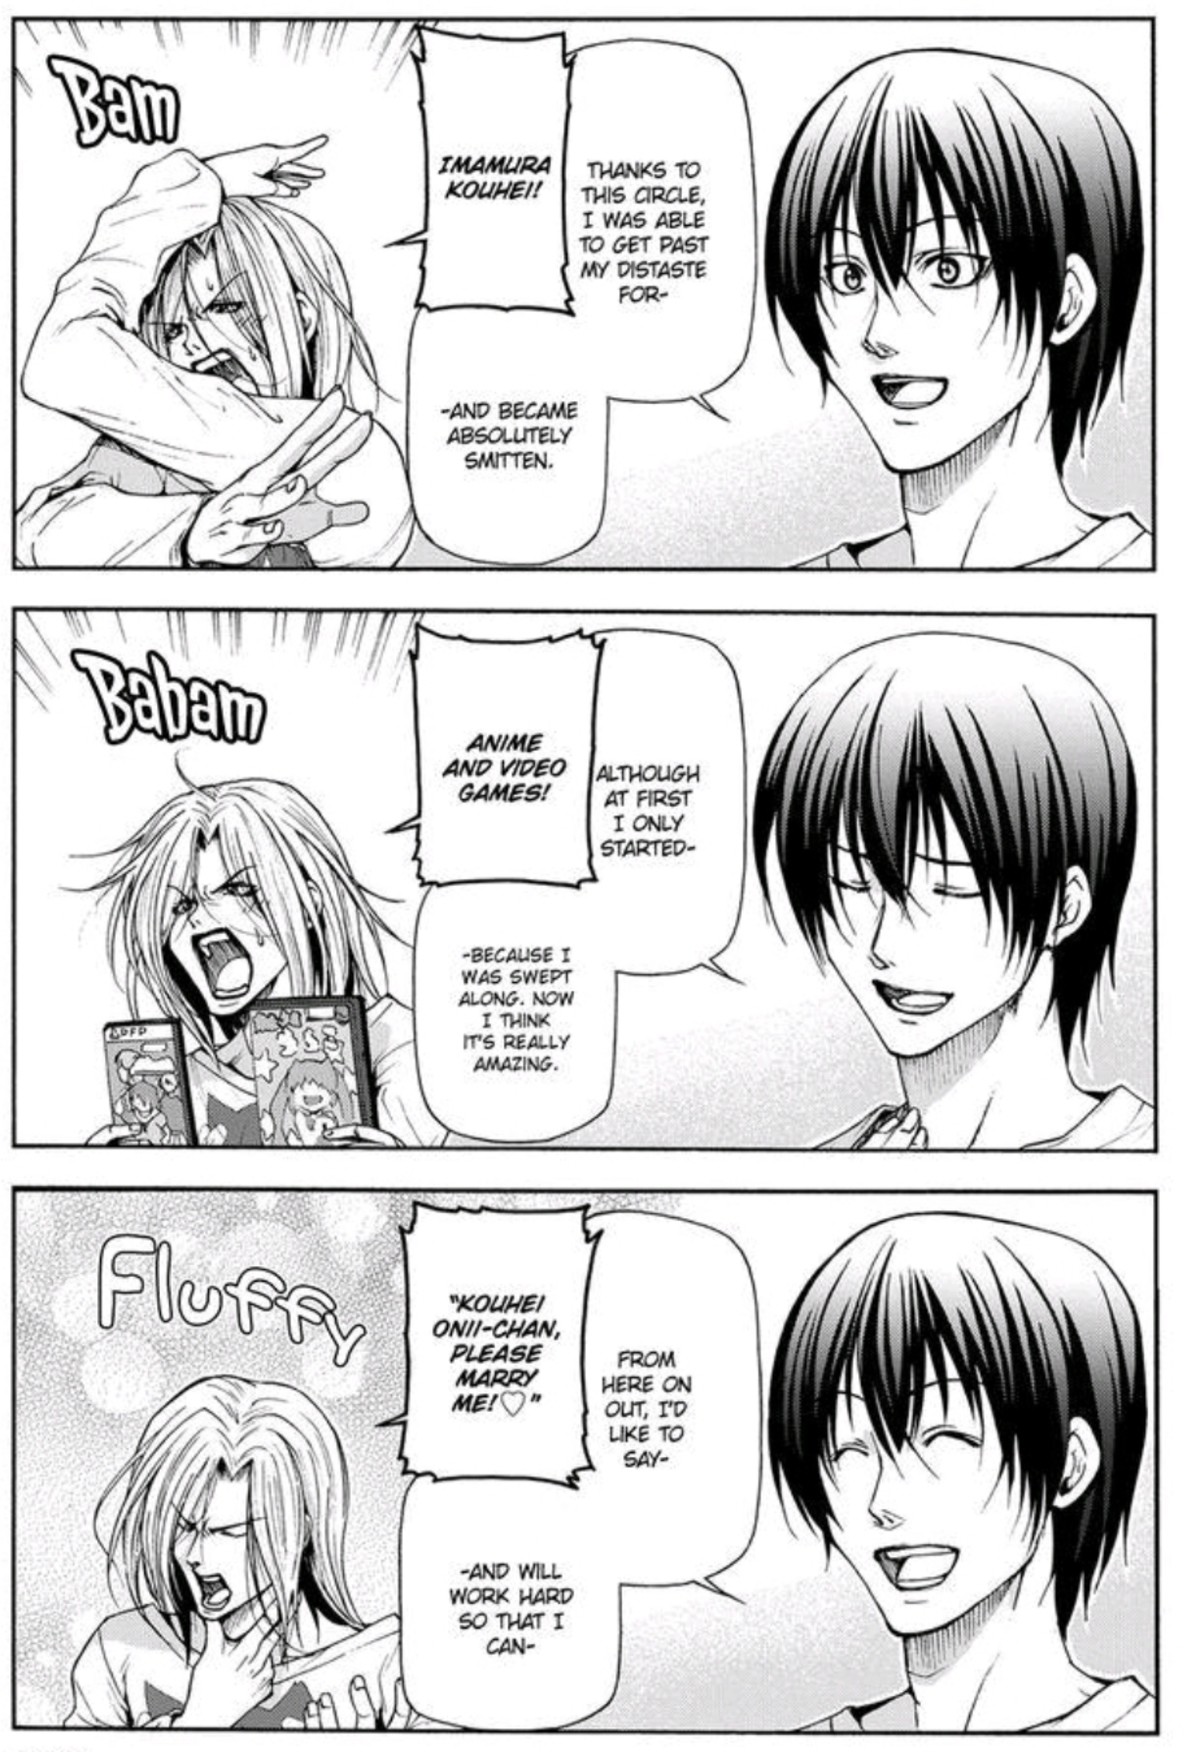 Typical Grand Blue. Sauce is Grand Blue.. i start reading this week ago and i say it's enjoyable how the they still have functional liver when they chugging down a spirytus